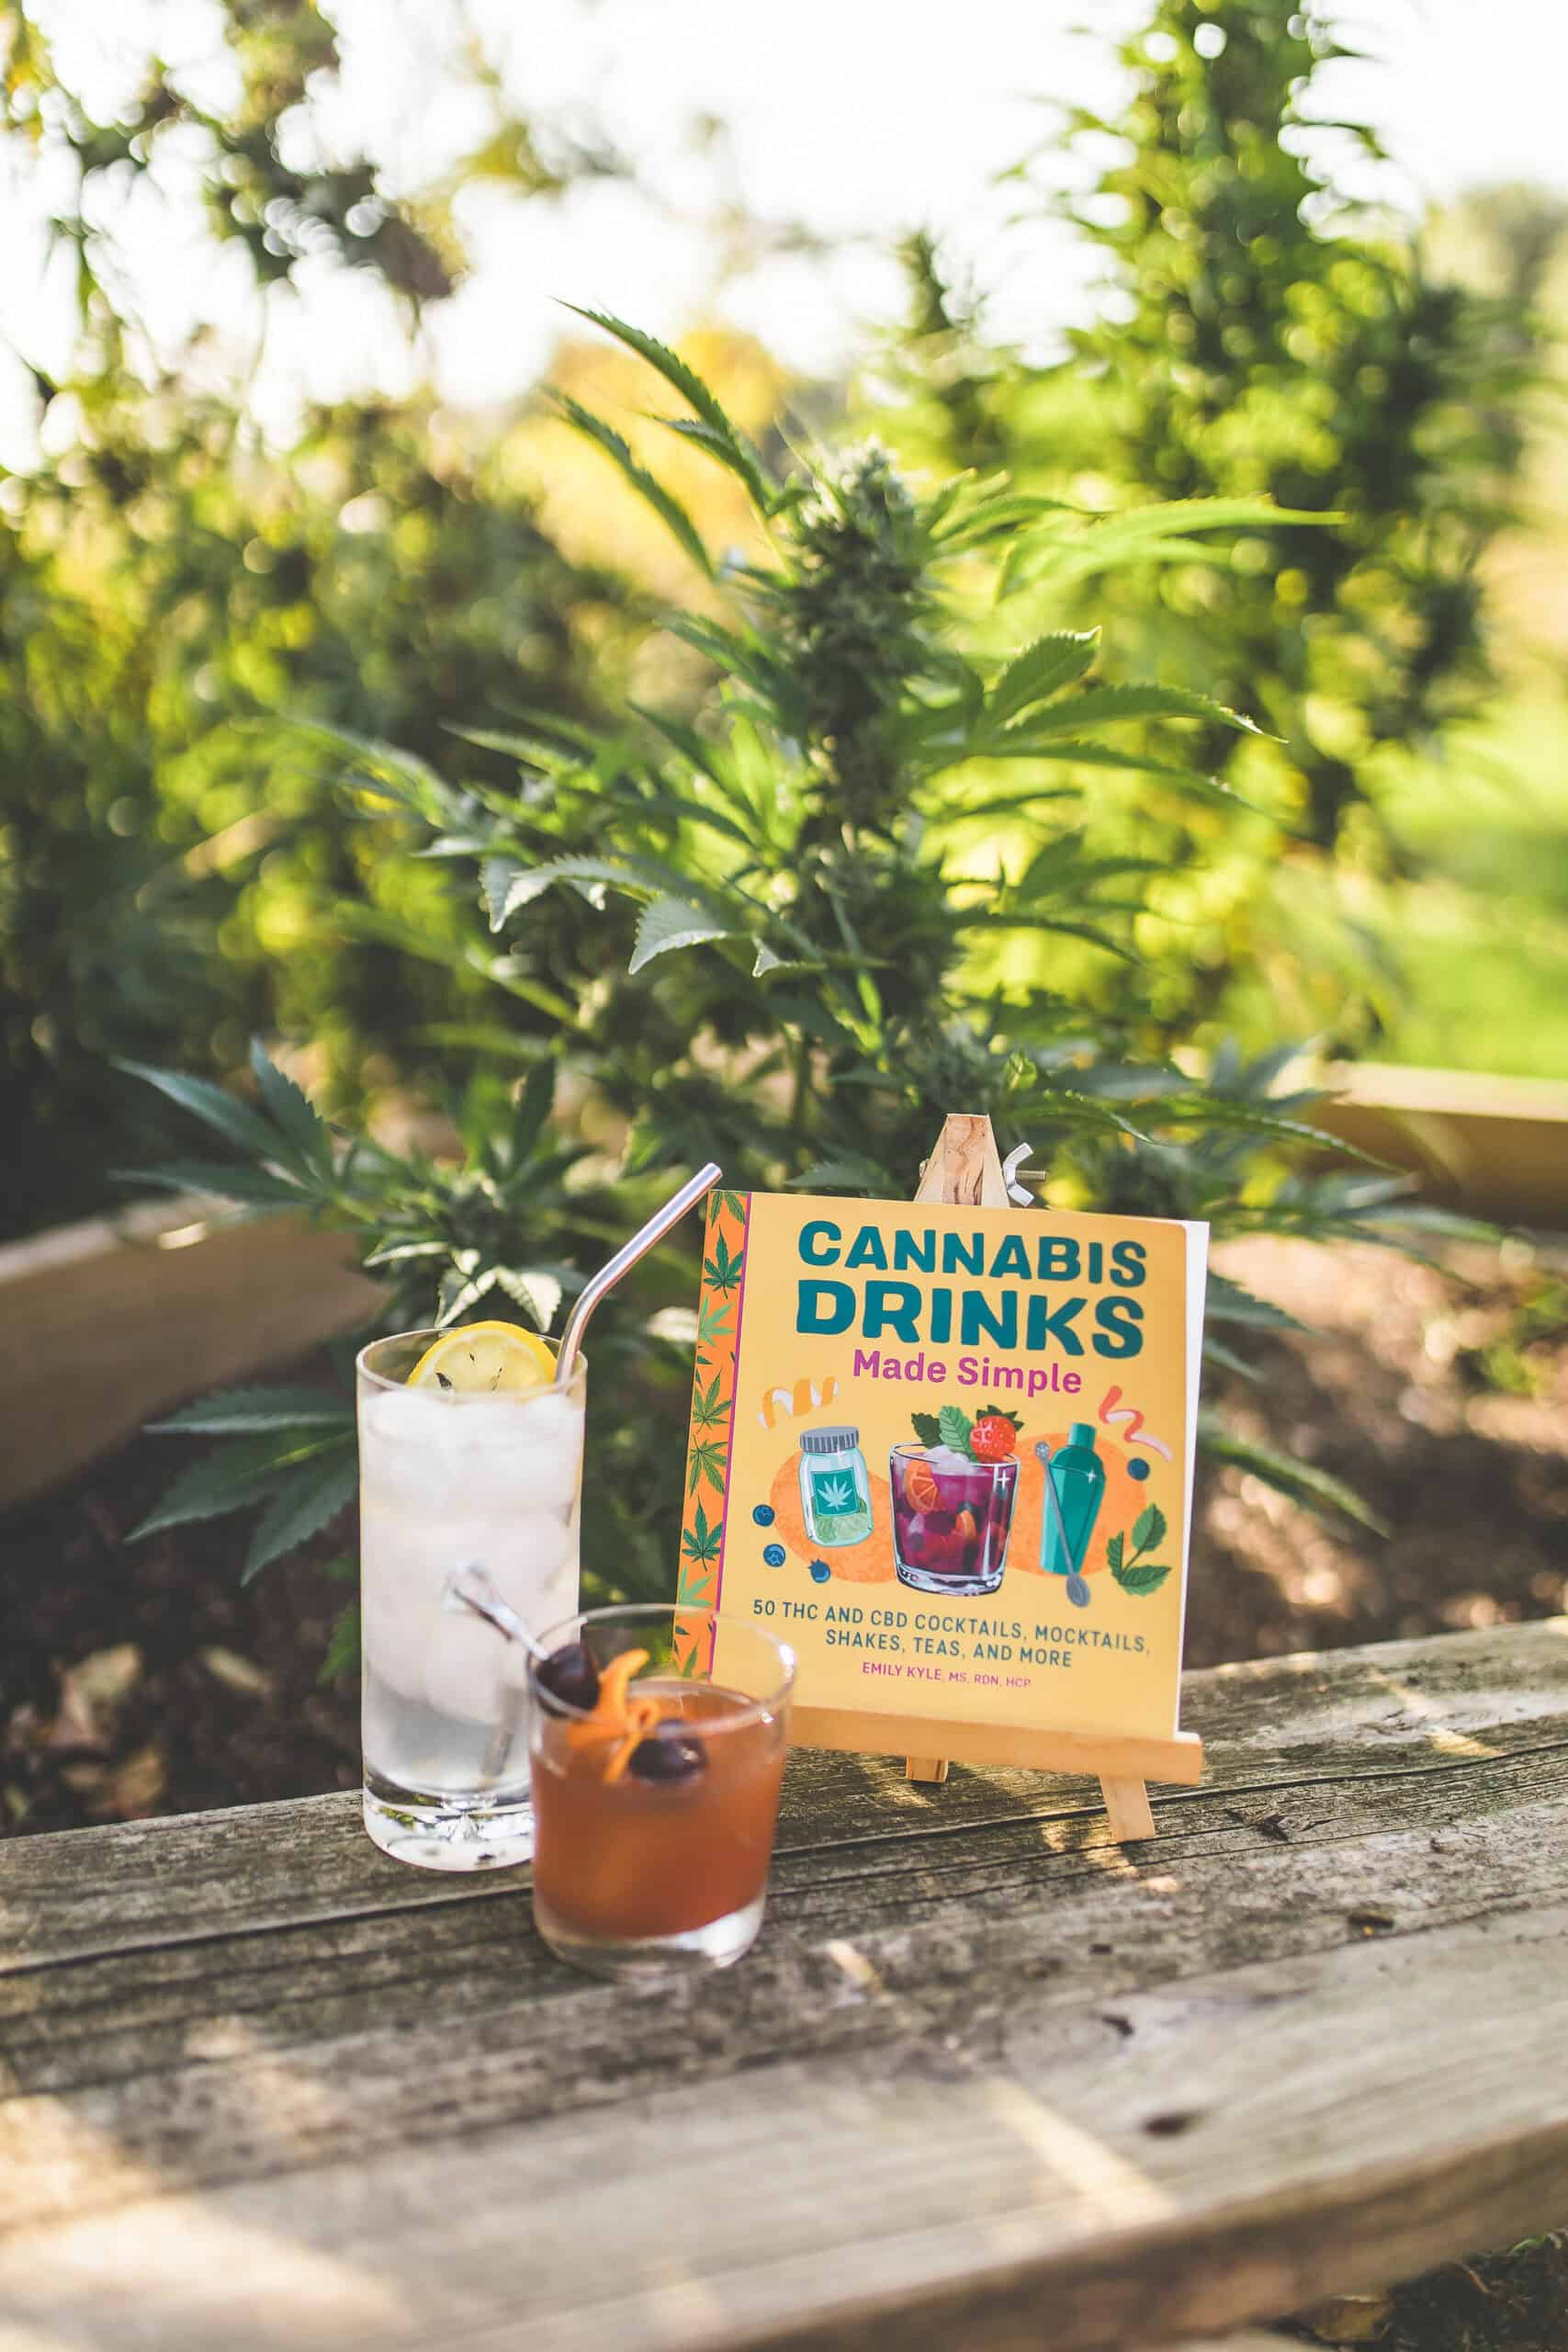 A picture of Emily Kyles cannabis drinks made simple cookbook.